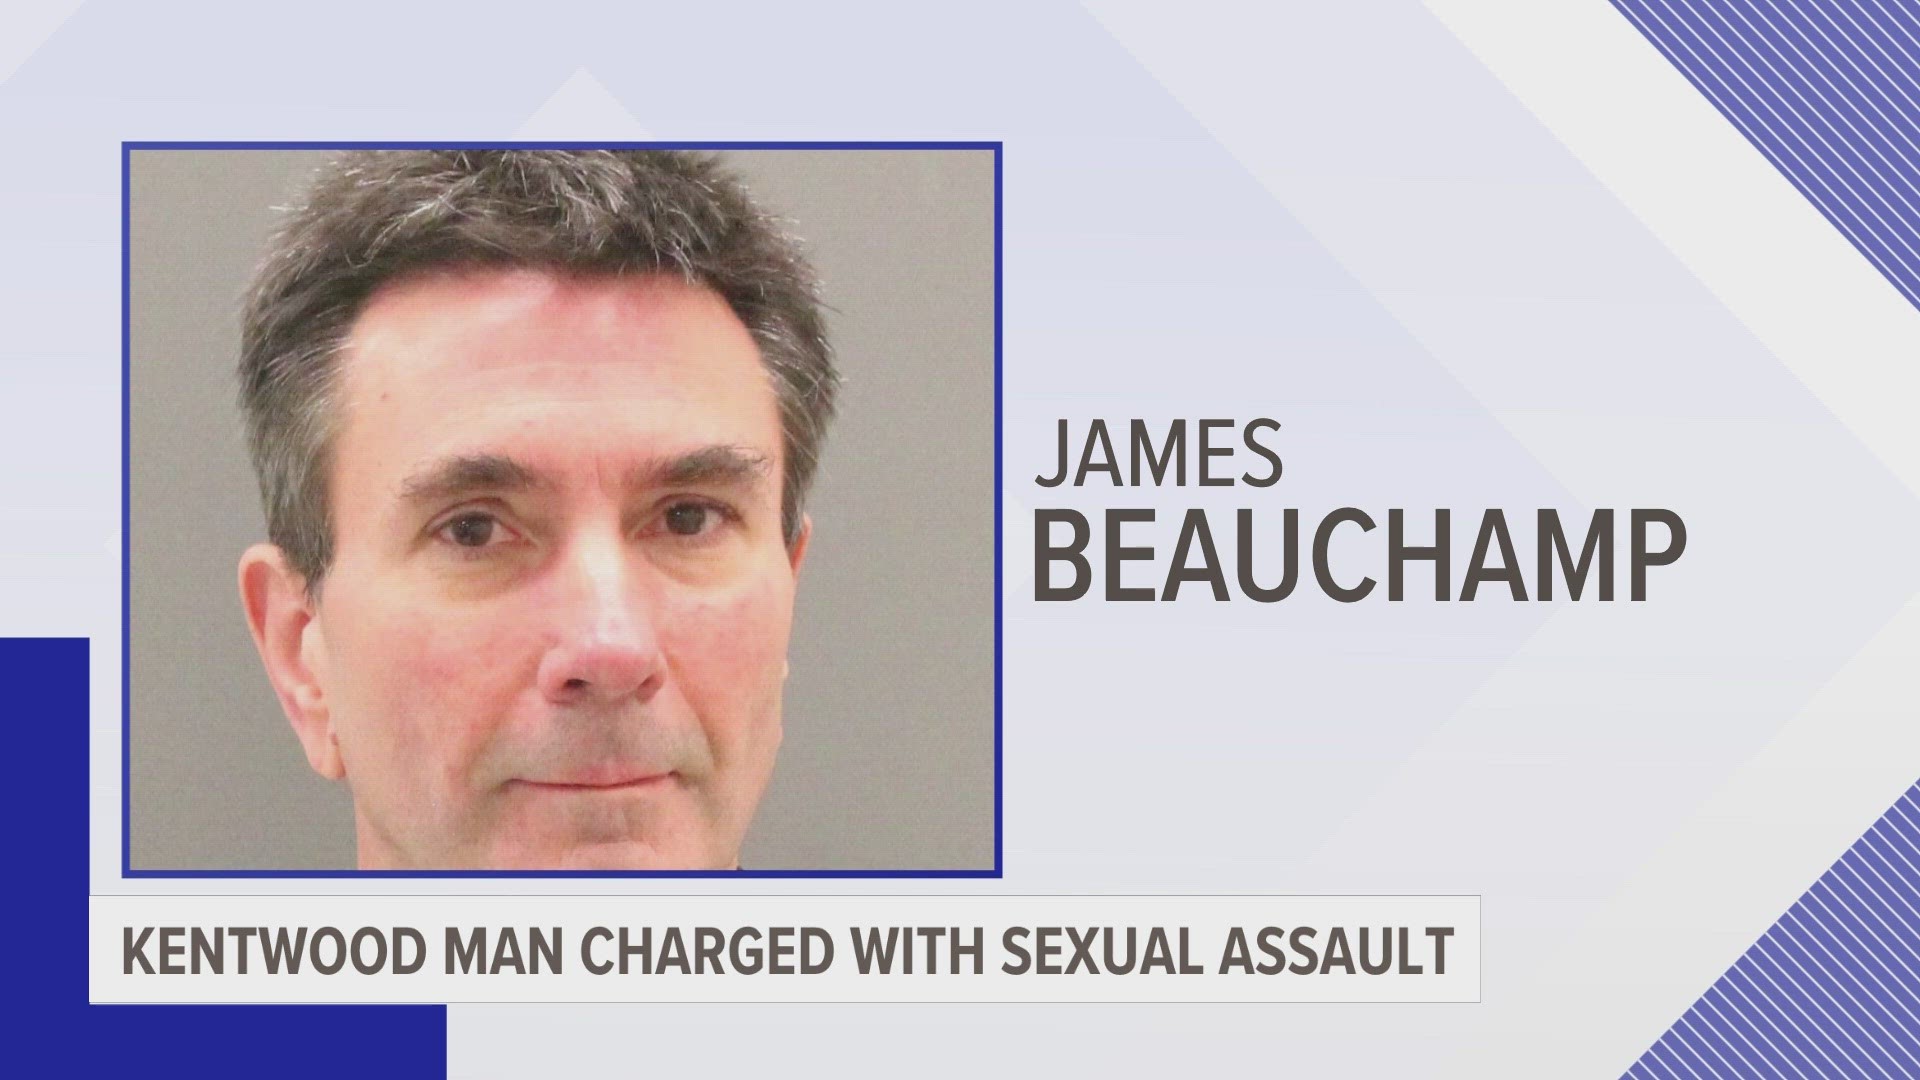 A Kentwood man is facing charges after allegedly sexually assaulting a 17-year-old boy and taking photos of him without his consent.